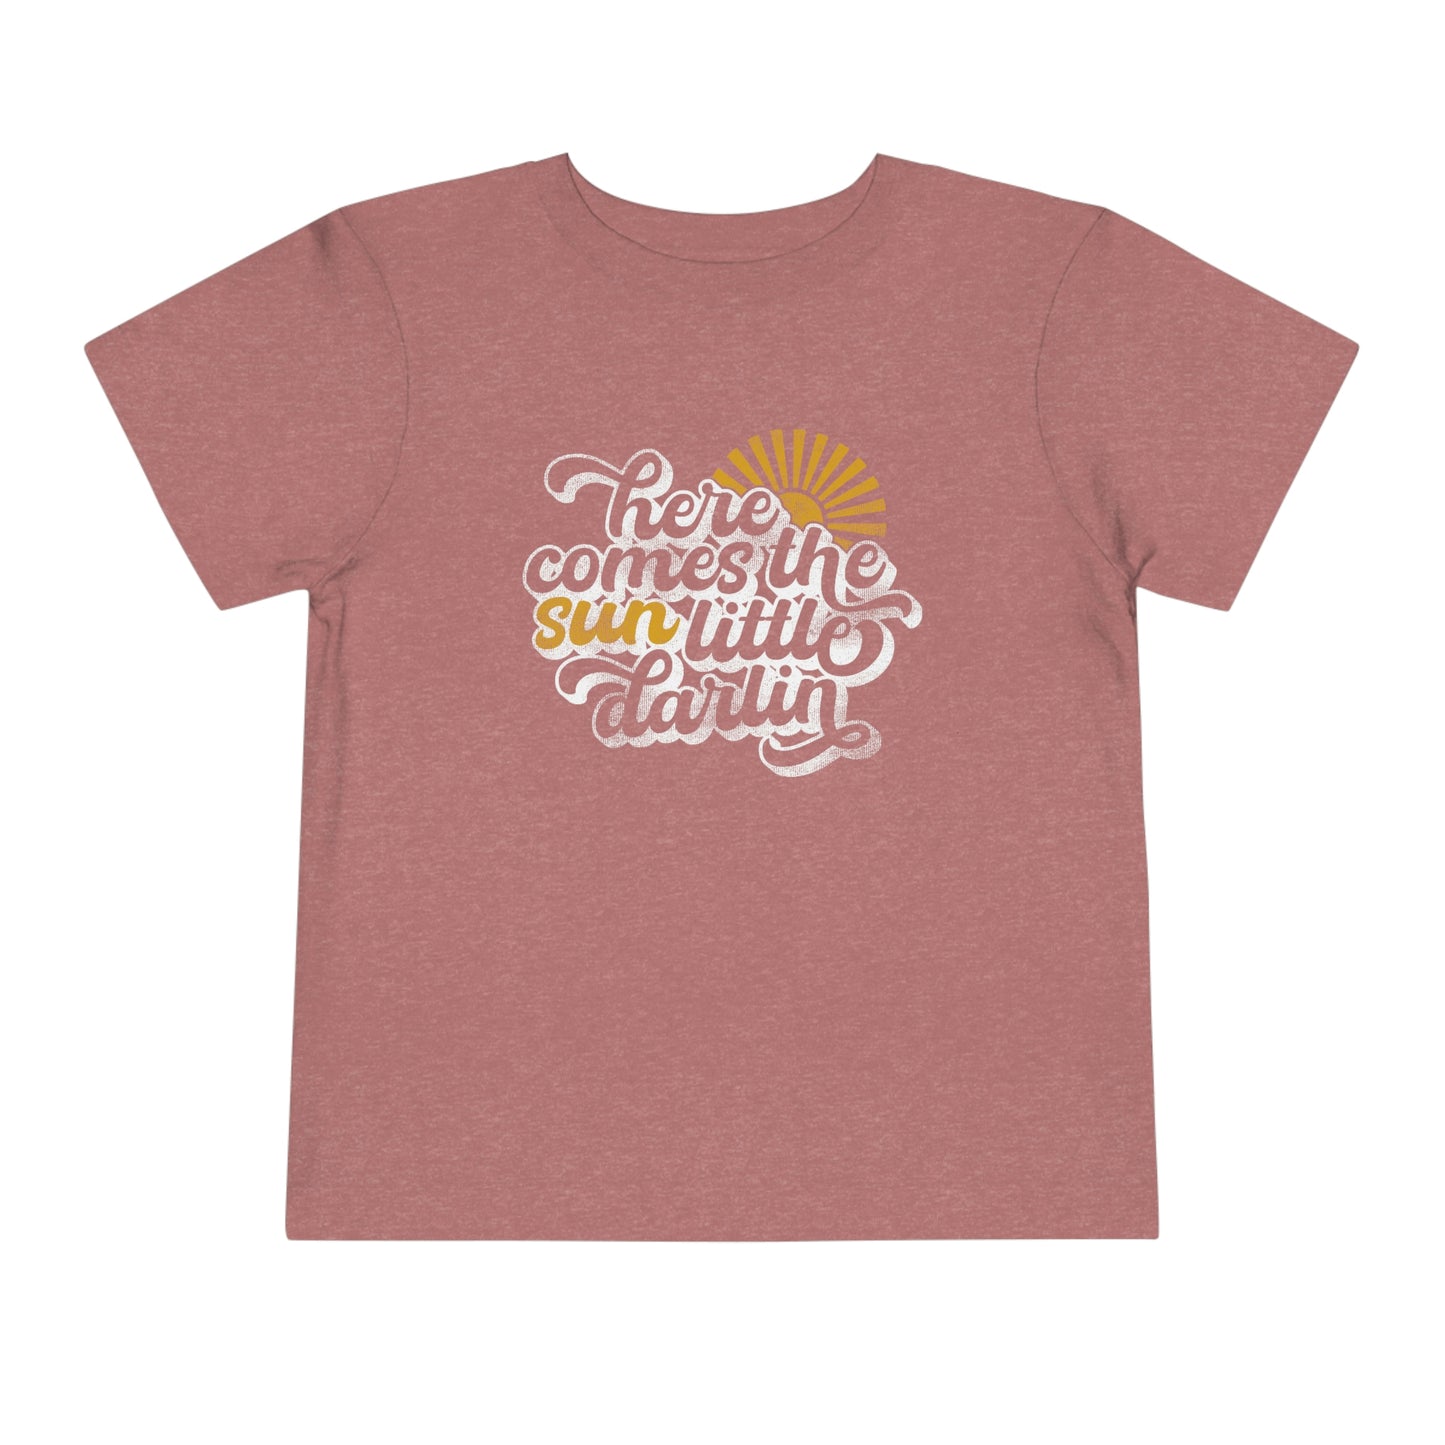 Here Comes the Sun Retro Toddler Tee